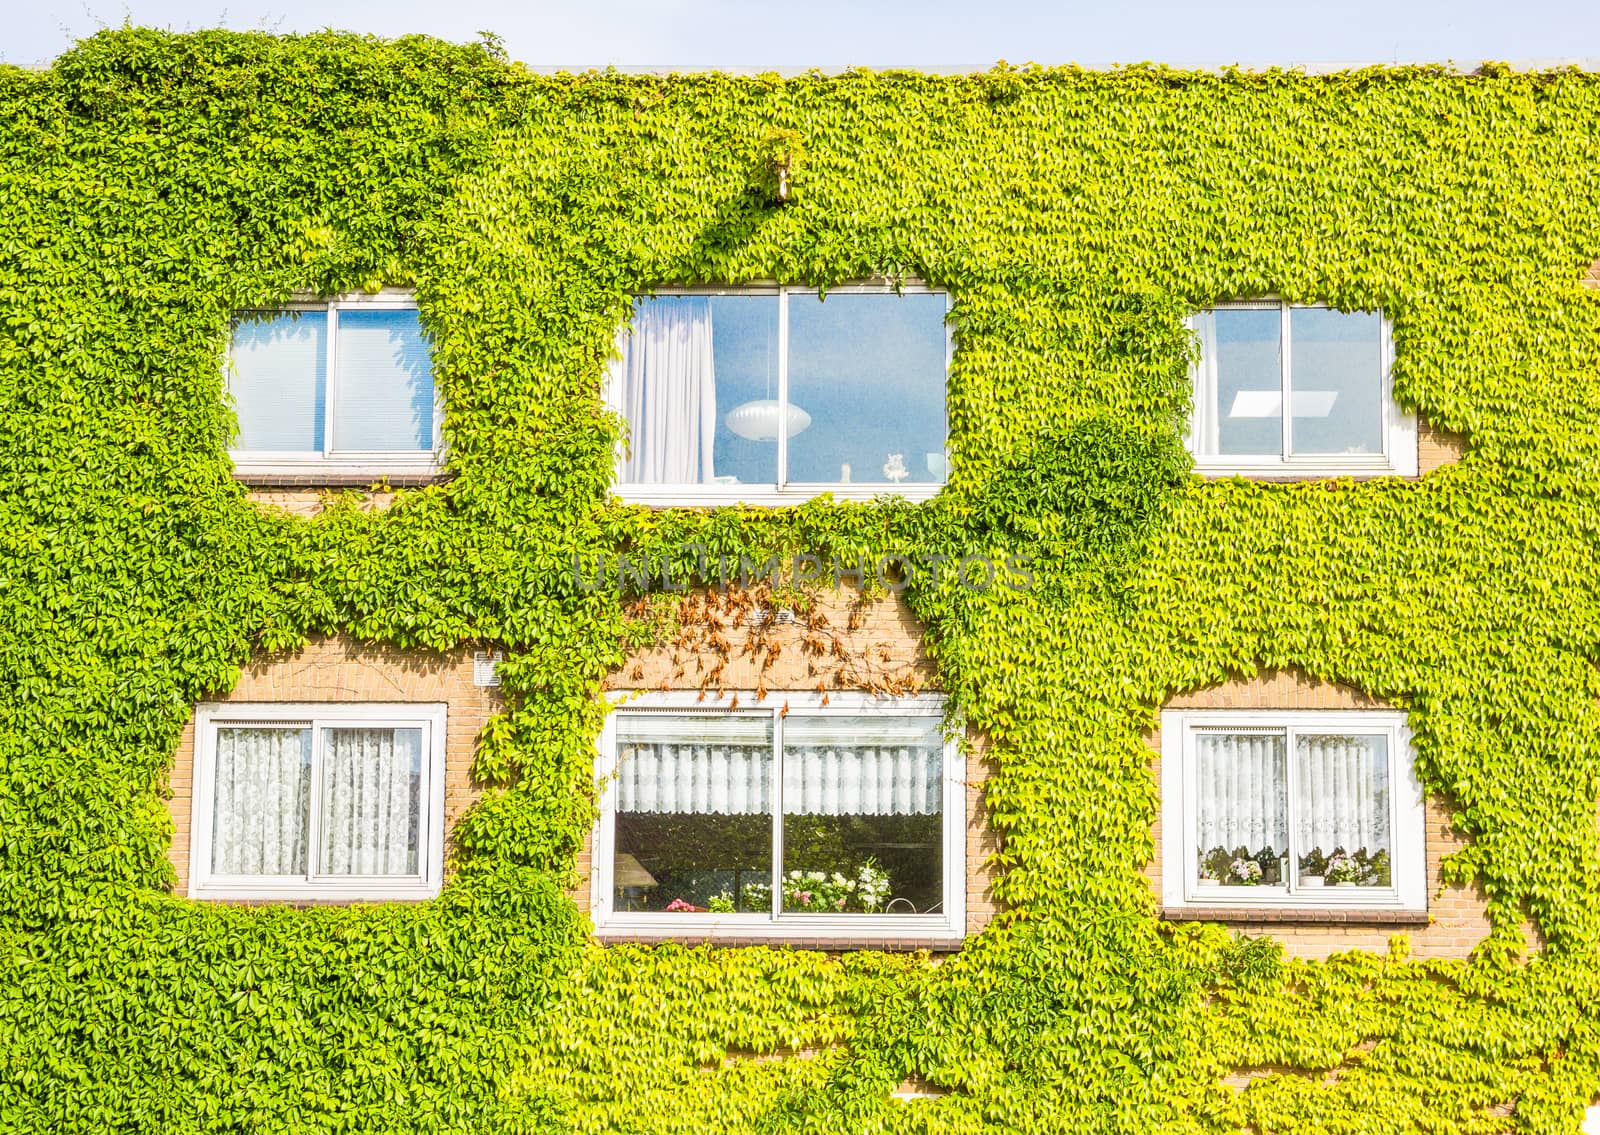 Ecological building with the wall full of plants by gianliguori